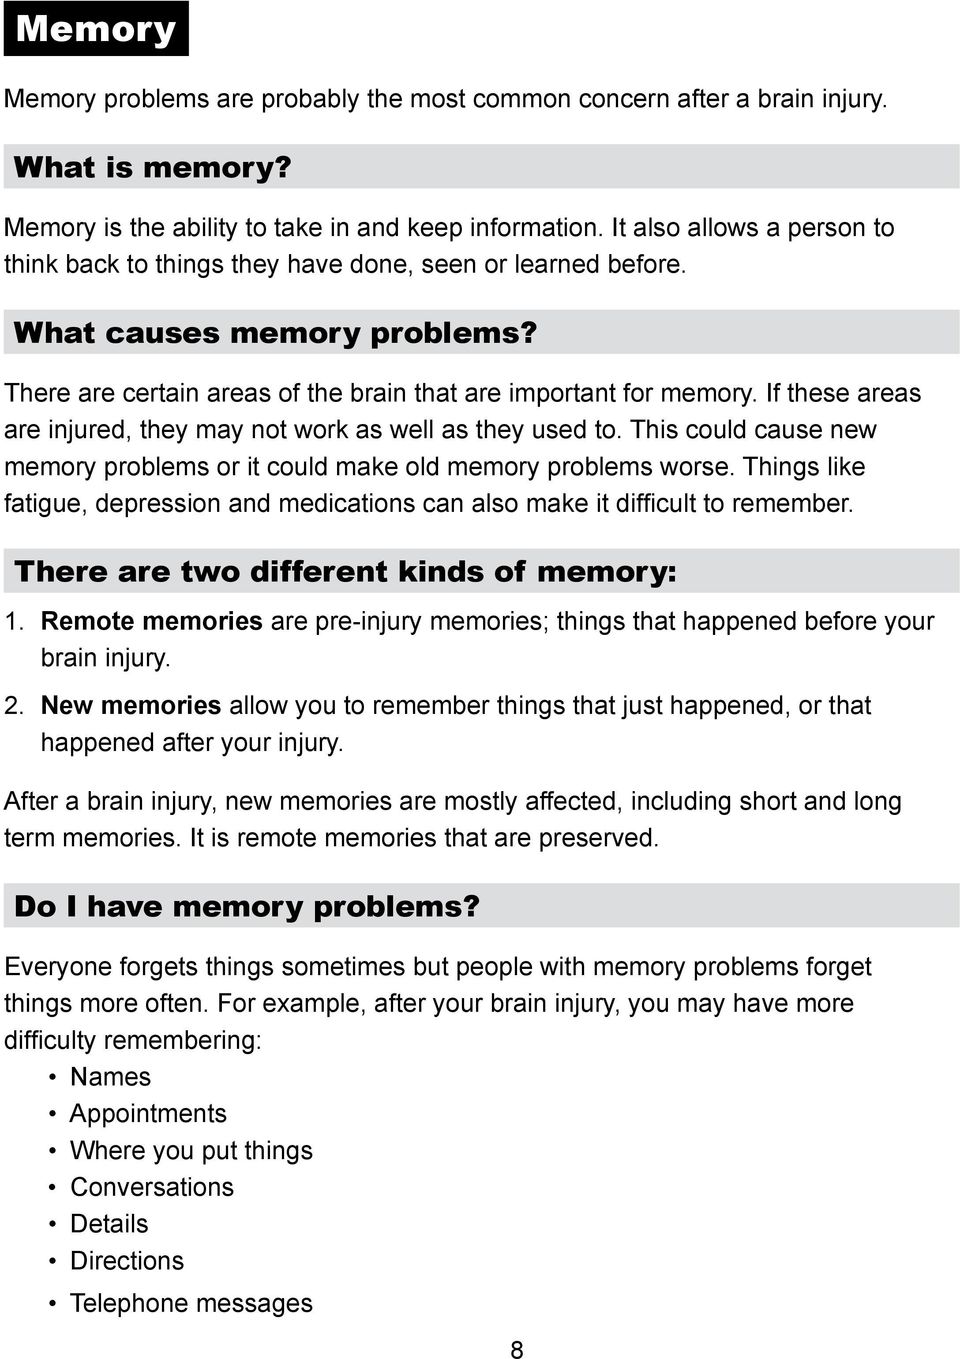 If these areas are injured, they may not work as well as they used to. This could cause new memory problems or it could make old memory problems worse.